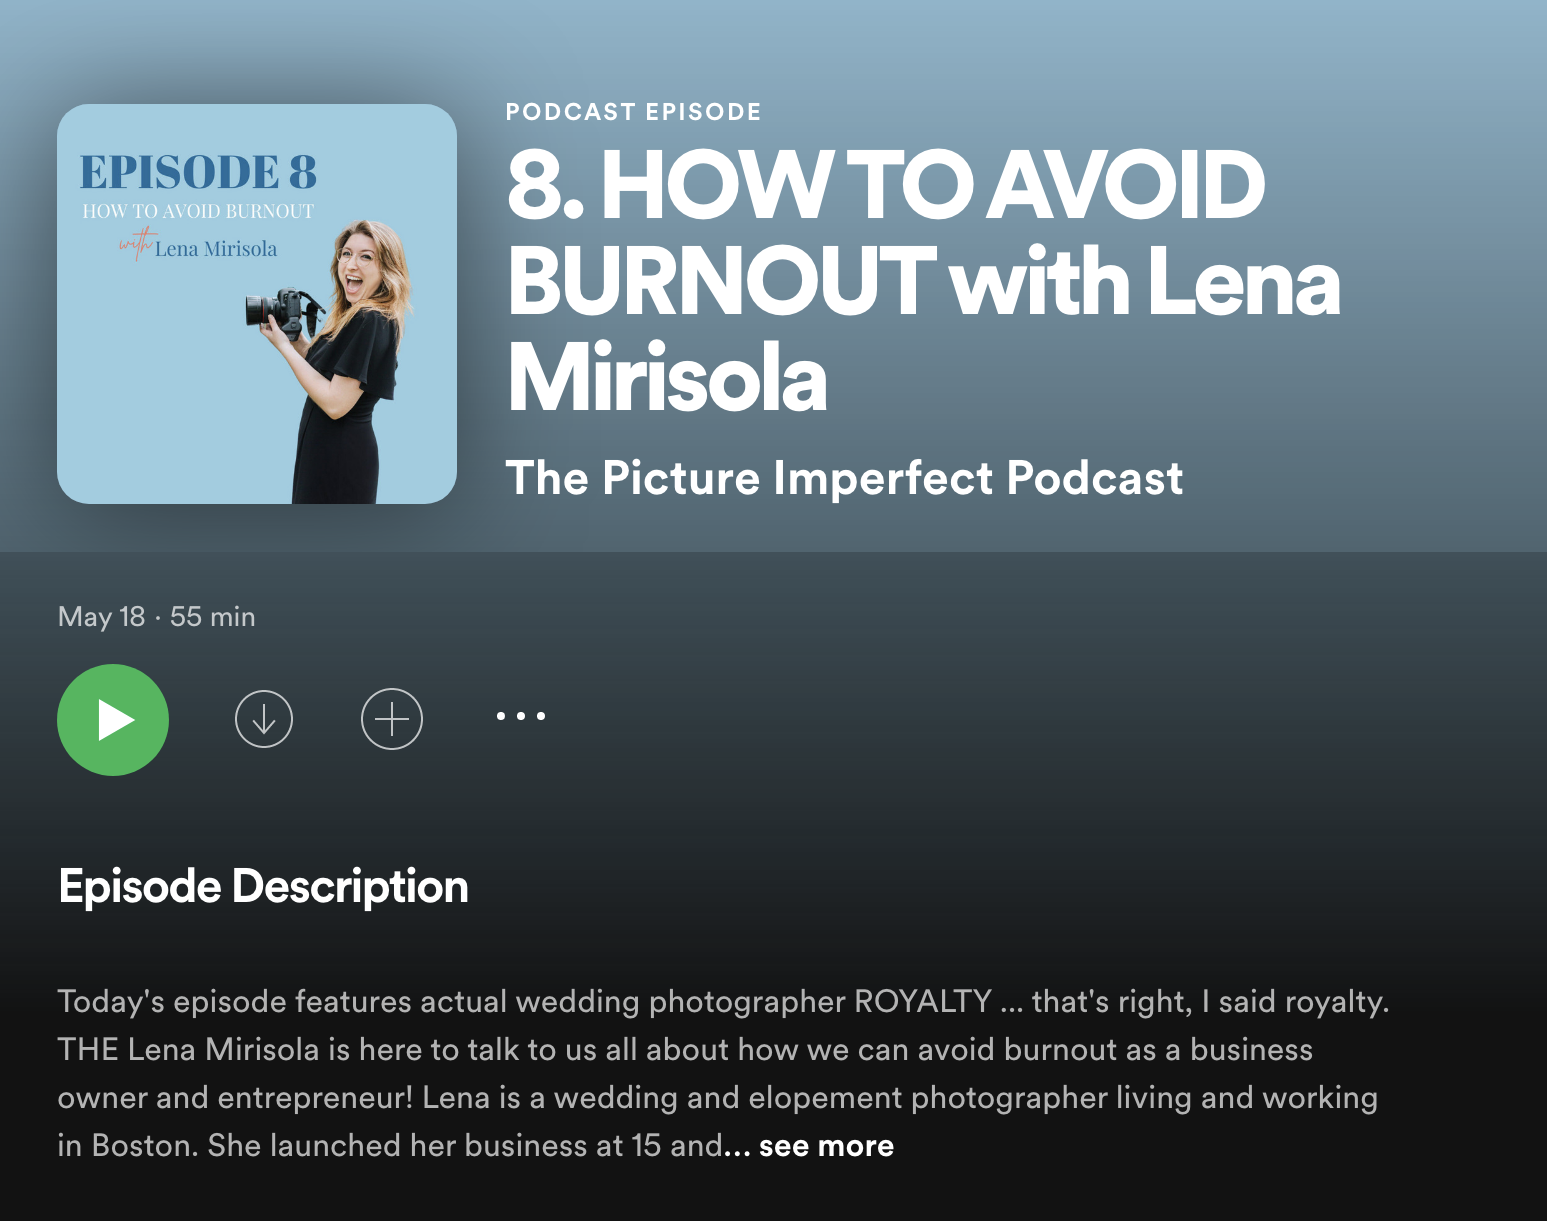 picture-imperfect-podcast-lena-mirisola.PNG